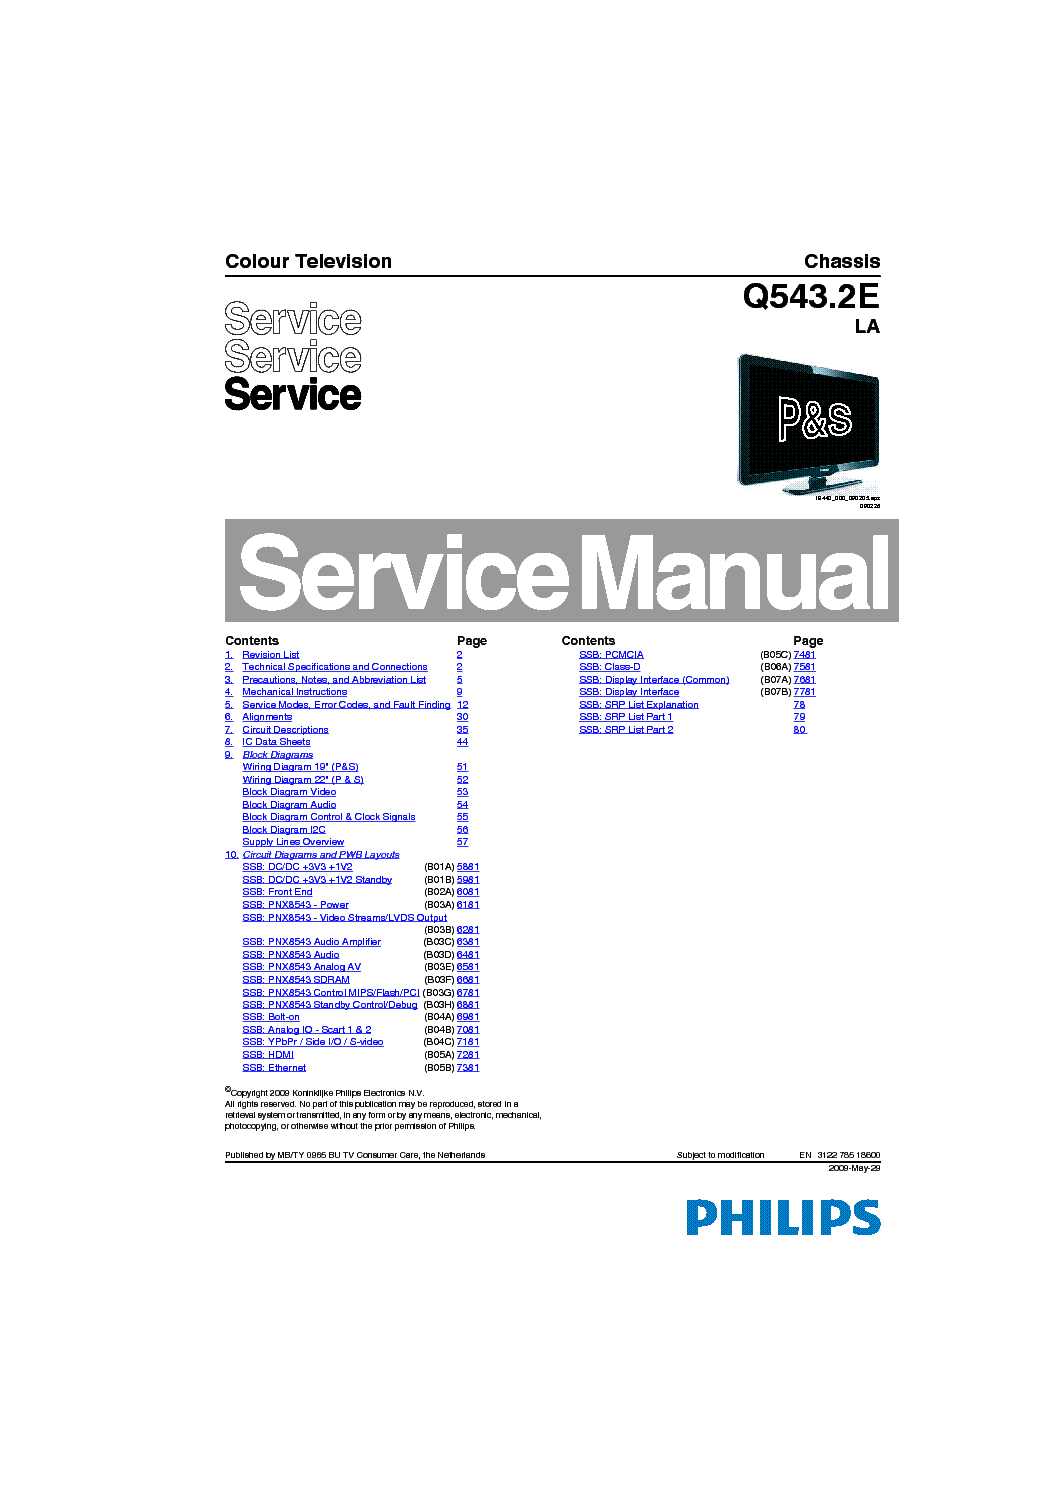 PHILIPS Q543.2E LA CHASSIS LCD service manual (1st page)